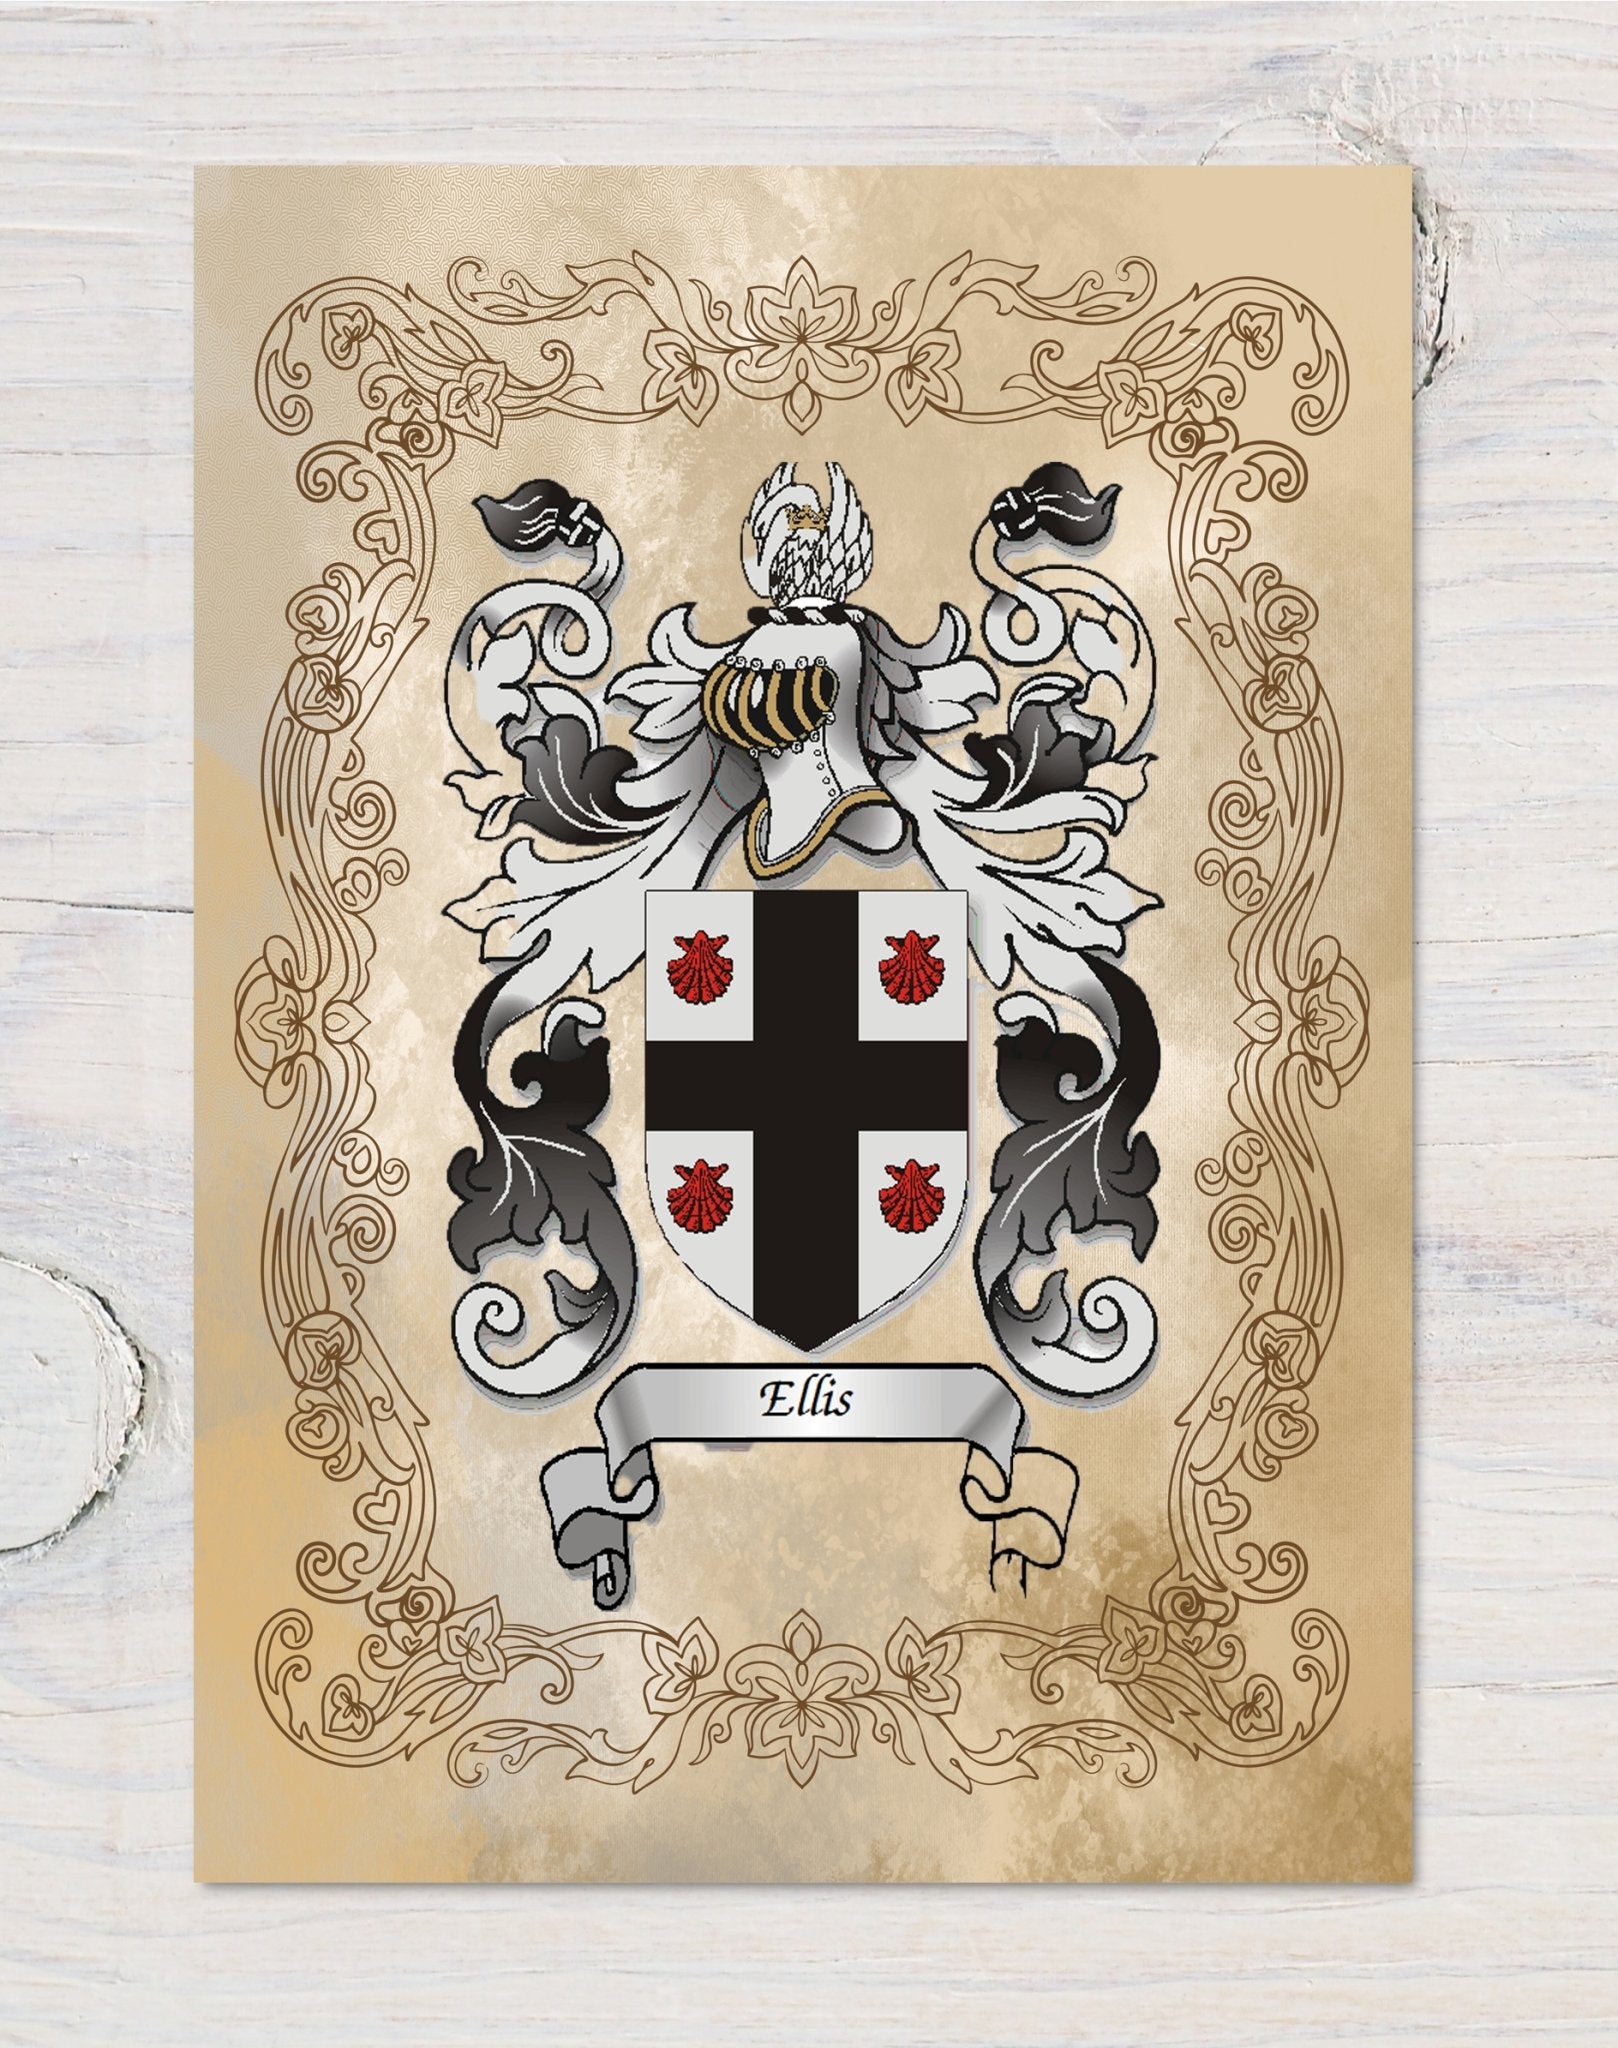 Letts Name Meaning, Family History, Family Crest & Coats of Arms